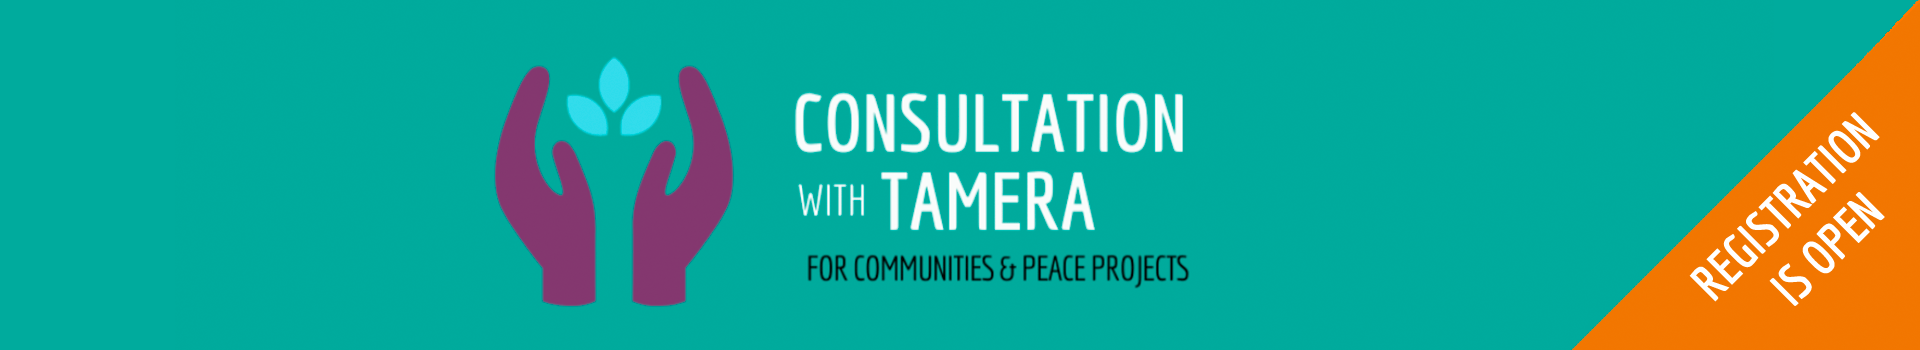 consultation with Tamera banner online course registration open